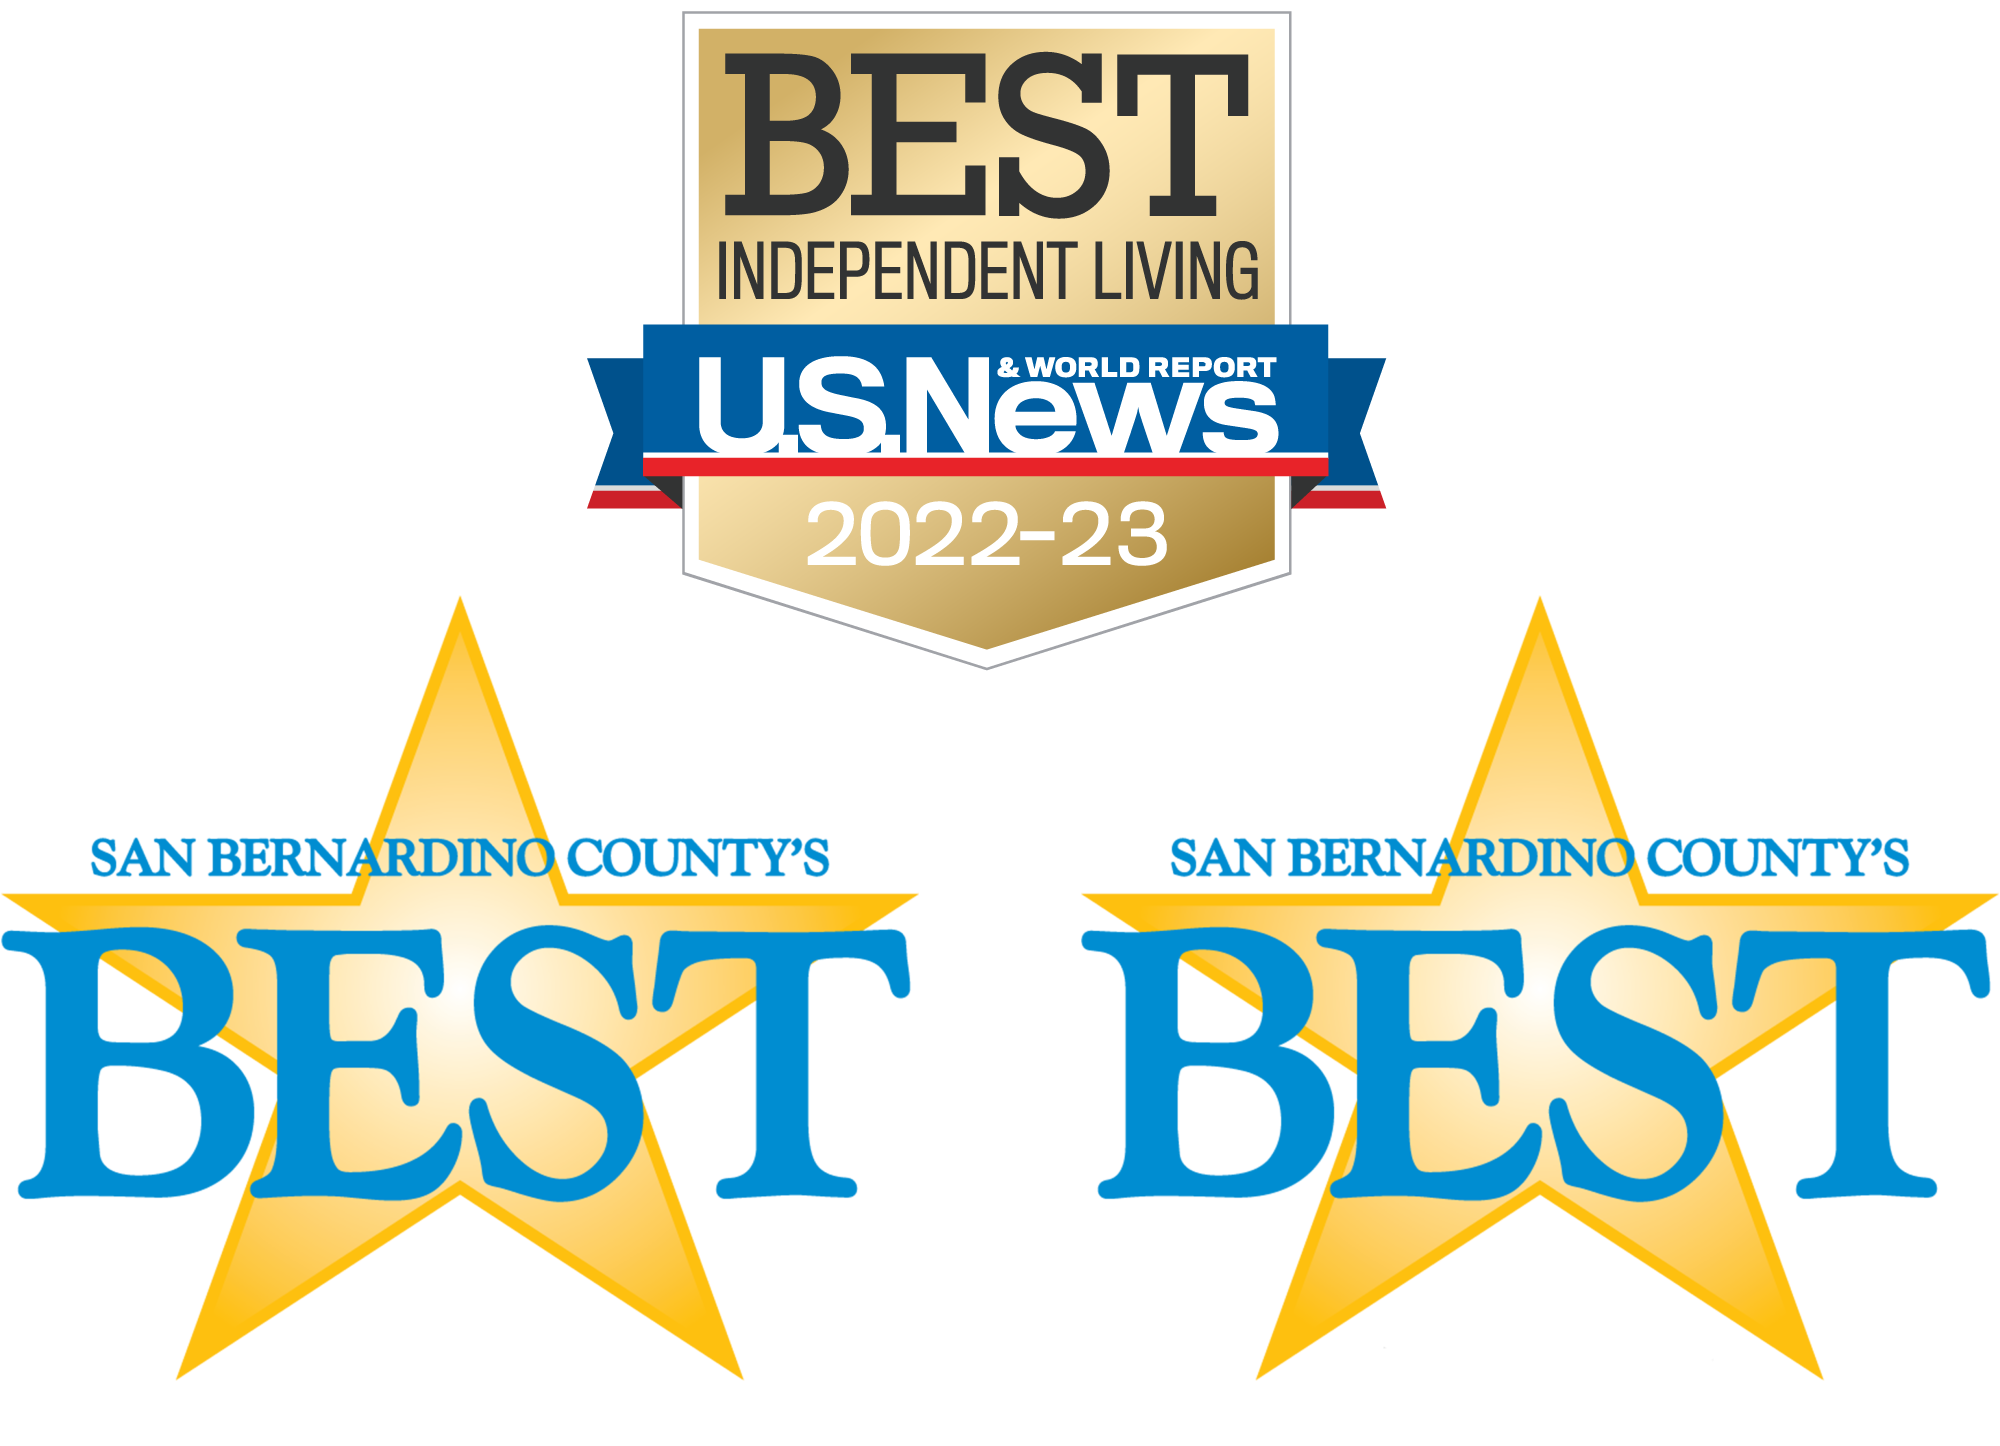 Best Independent Living. U.S. News A World Report. 2022-23. San Bernardino County's BEST 2021 and 2022 The Sun Redlands Daily Facts READERS CHOICE AWARDS.